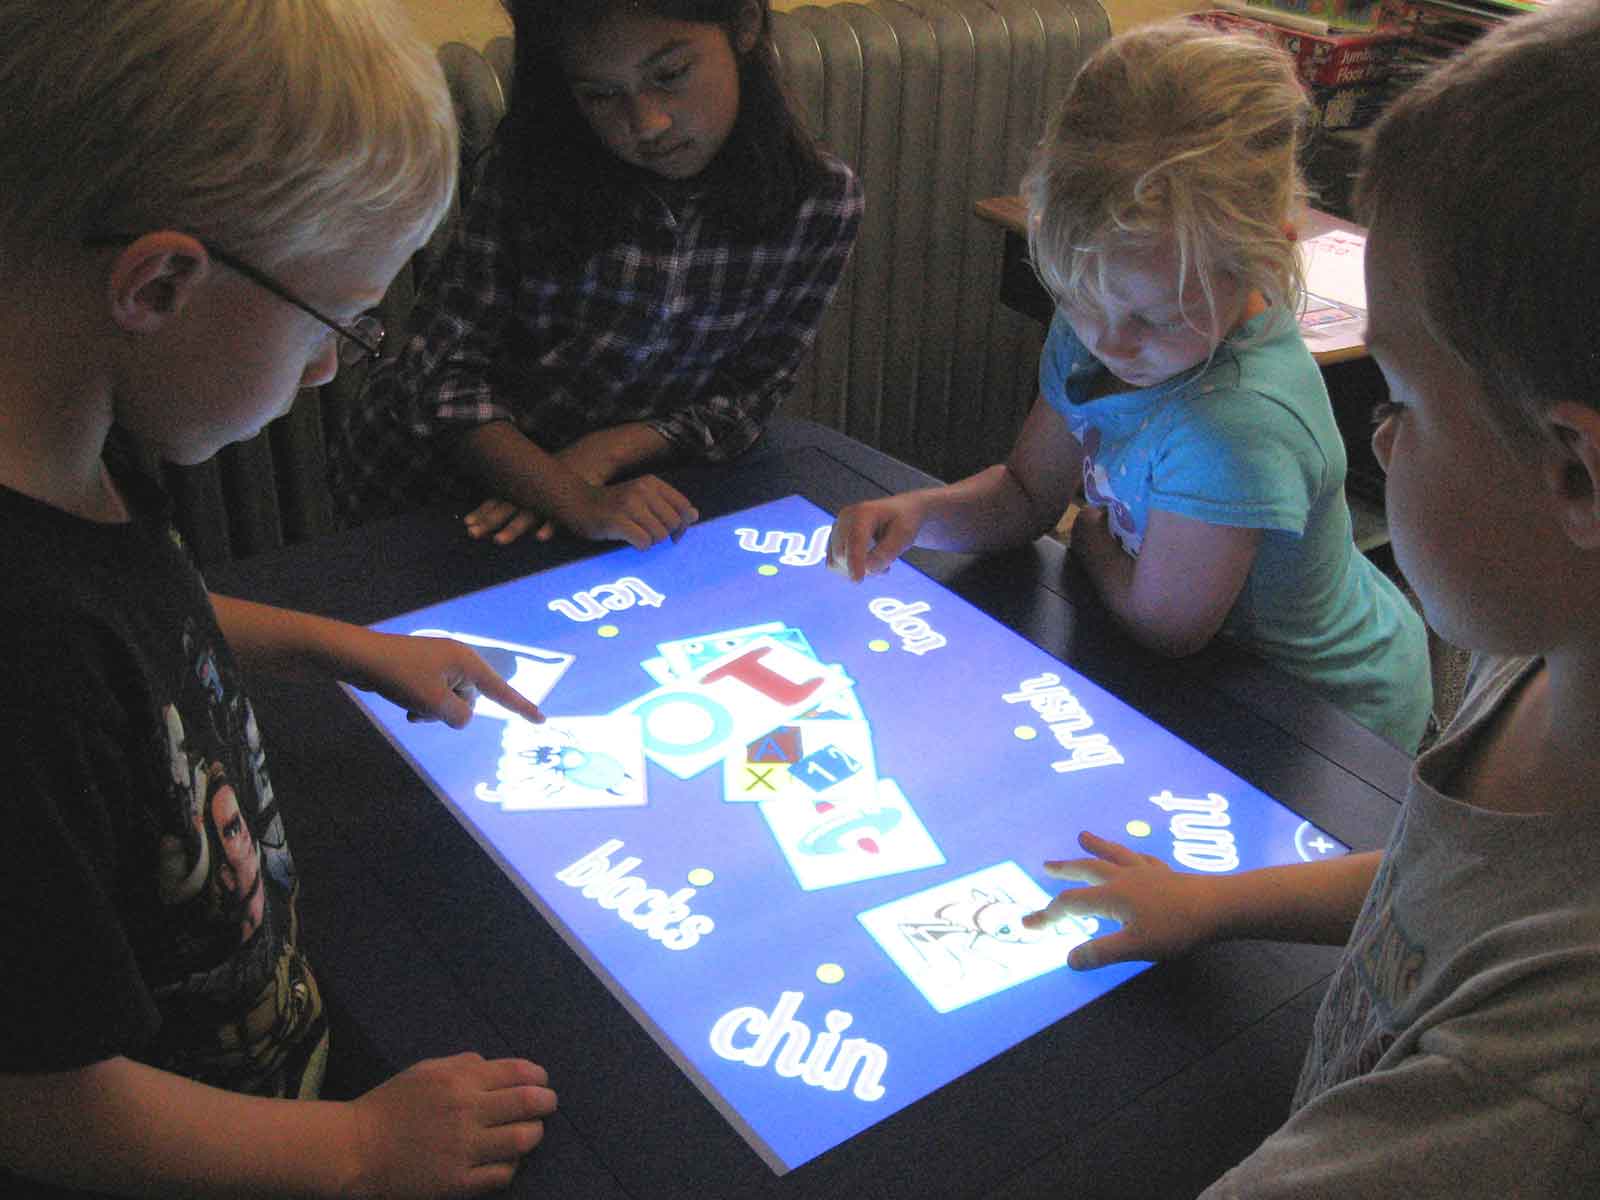 Children using a touch screen product to learn interactively